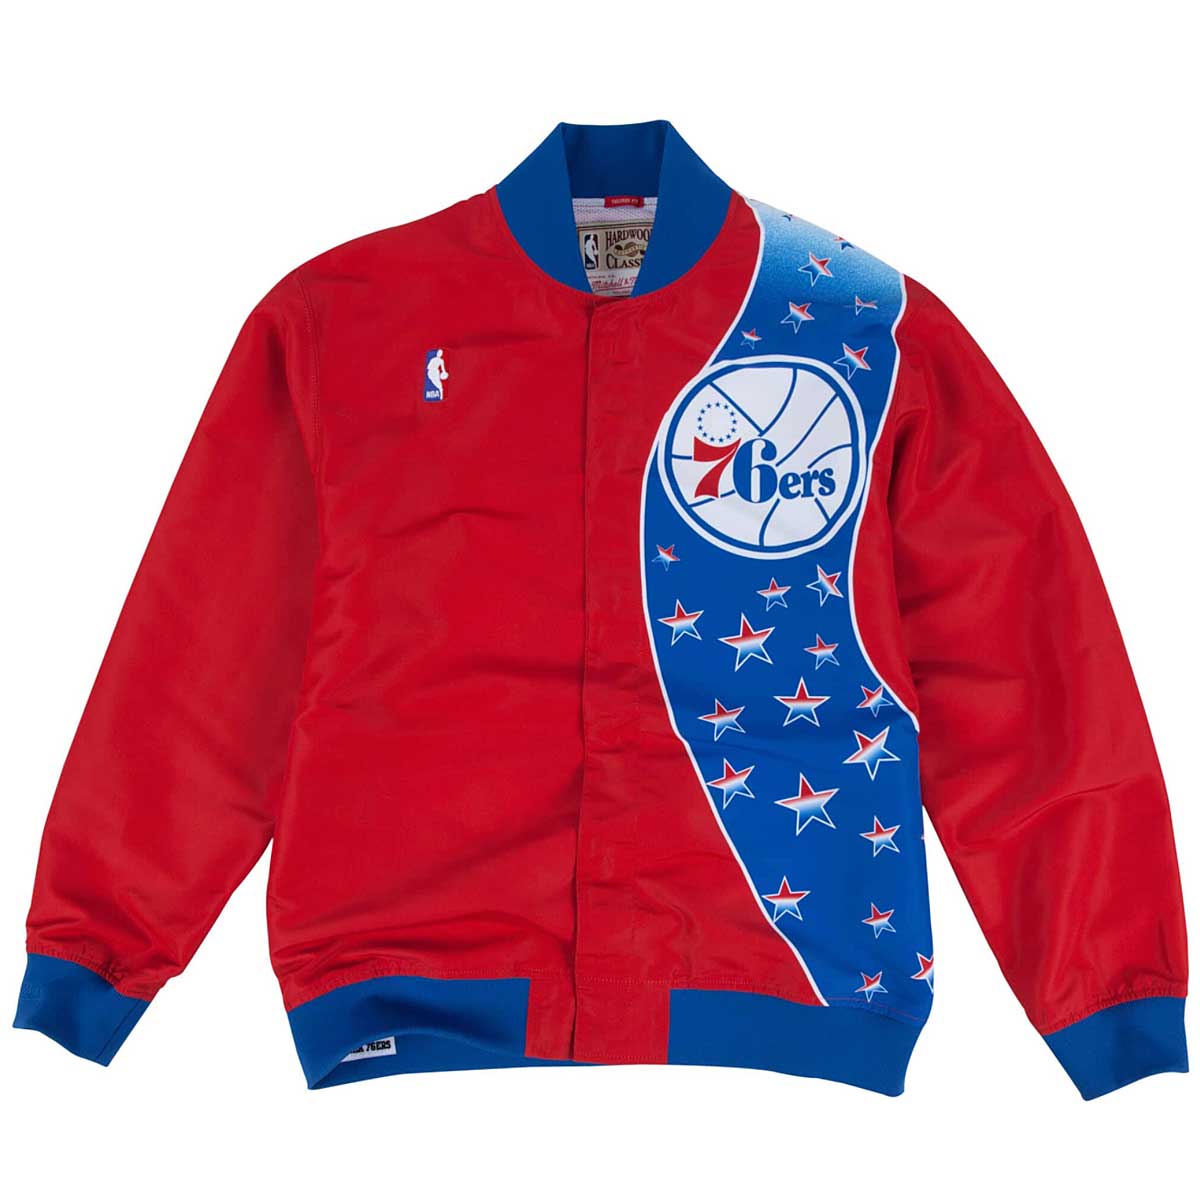 Mitchell And Ness Nba Philadelphia 76Ers Authentic Warm Up Jacket, Scarlet